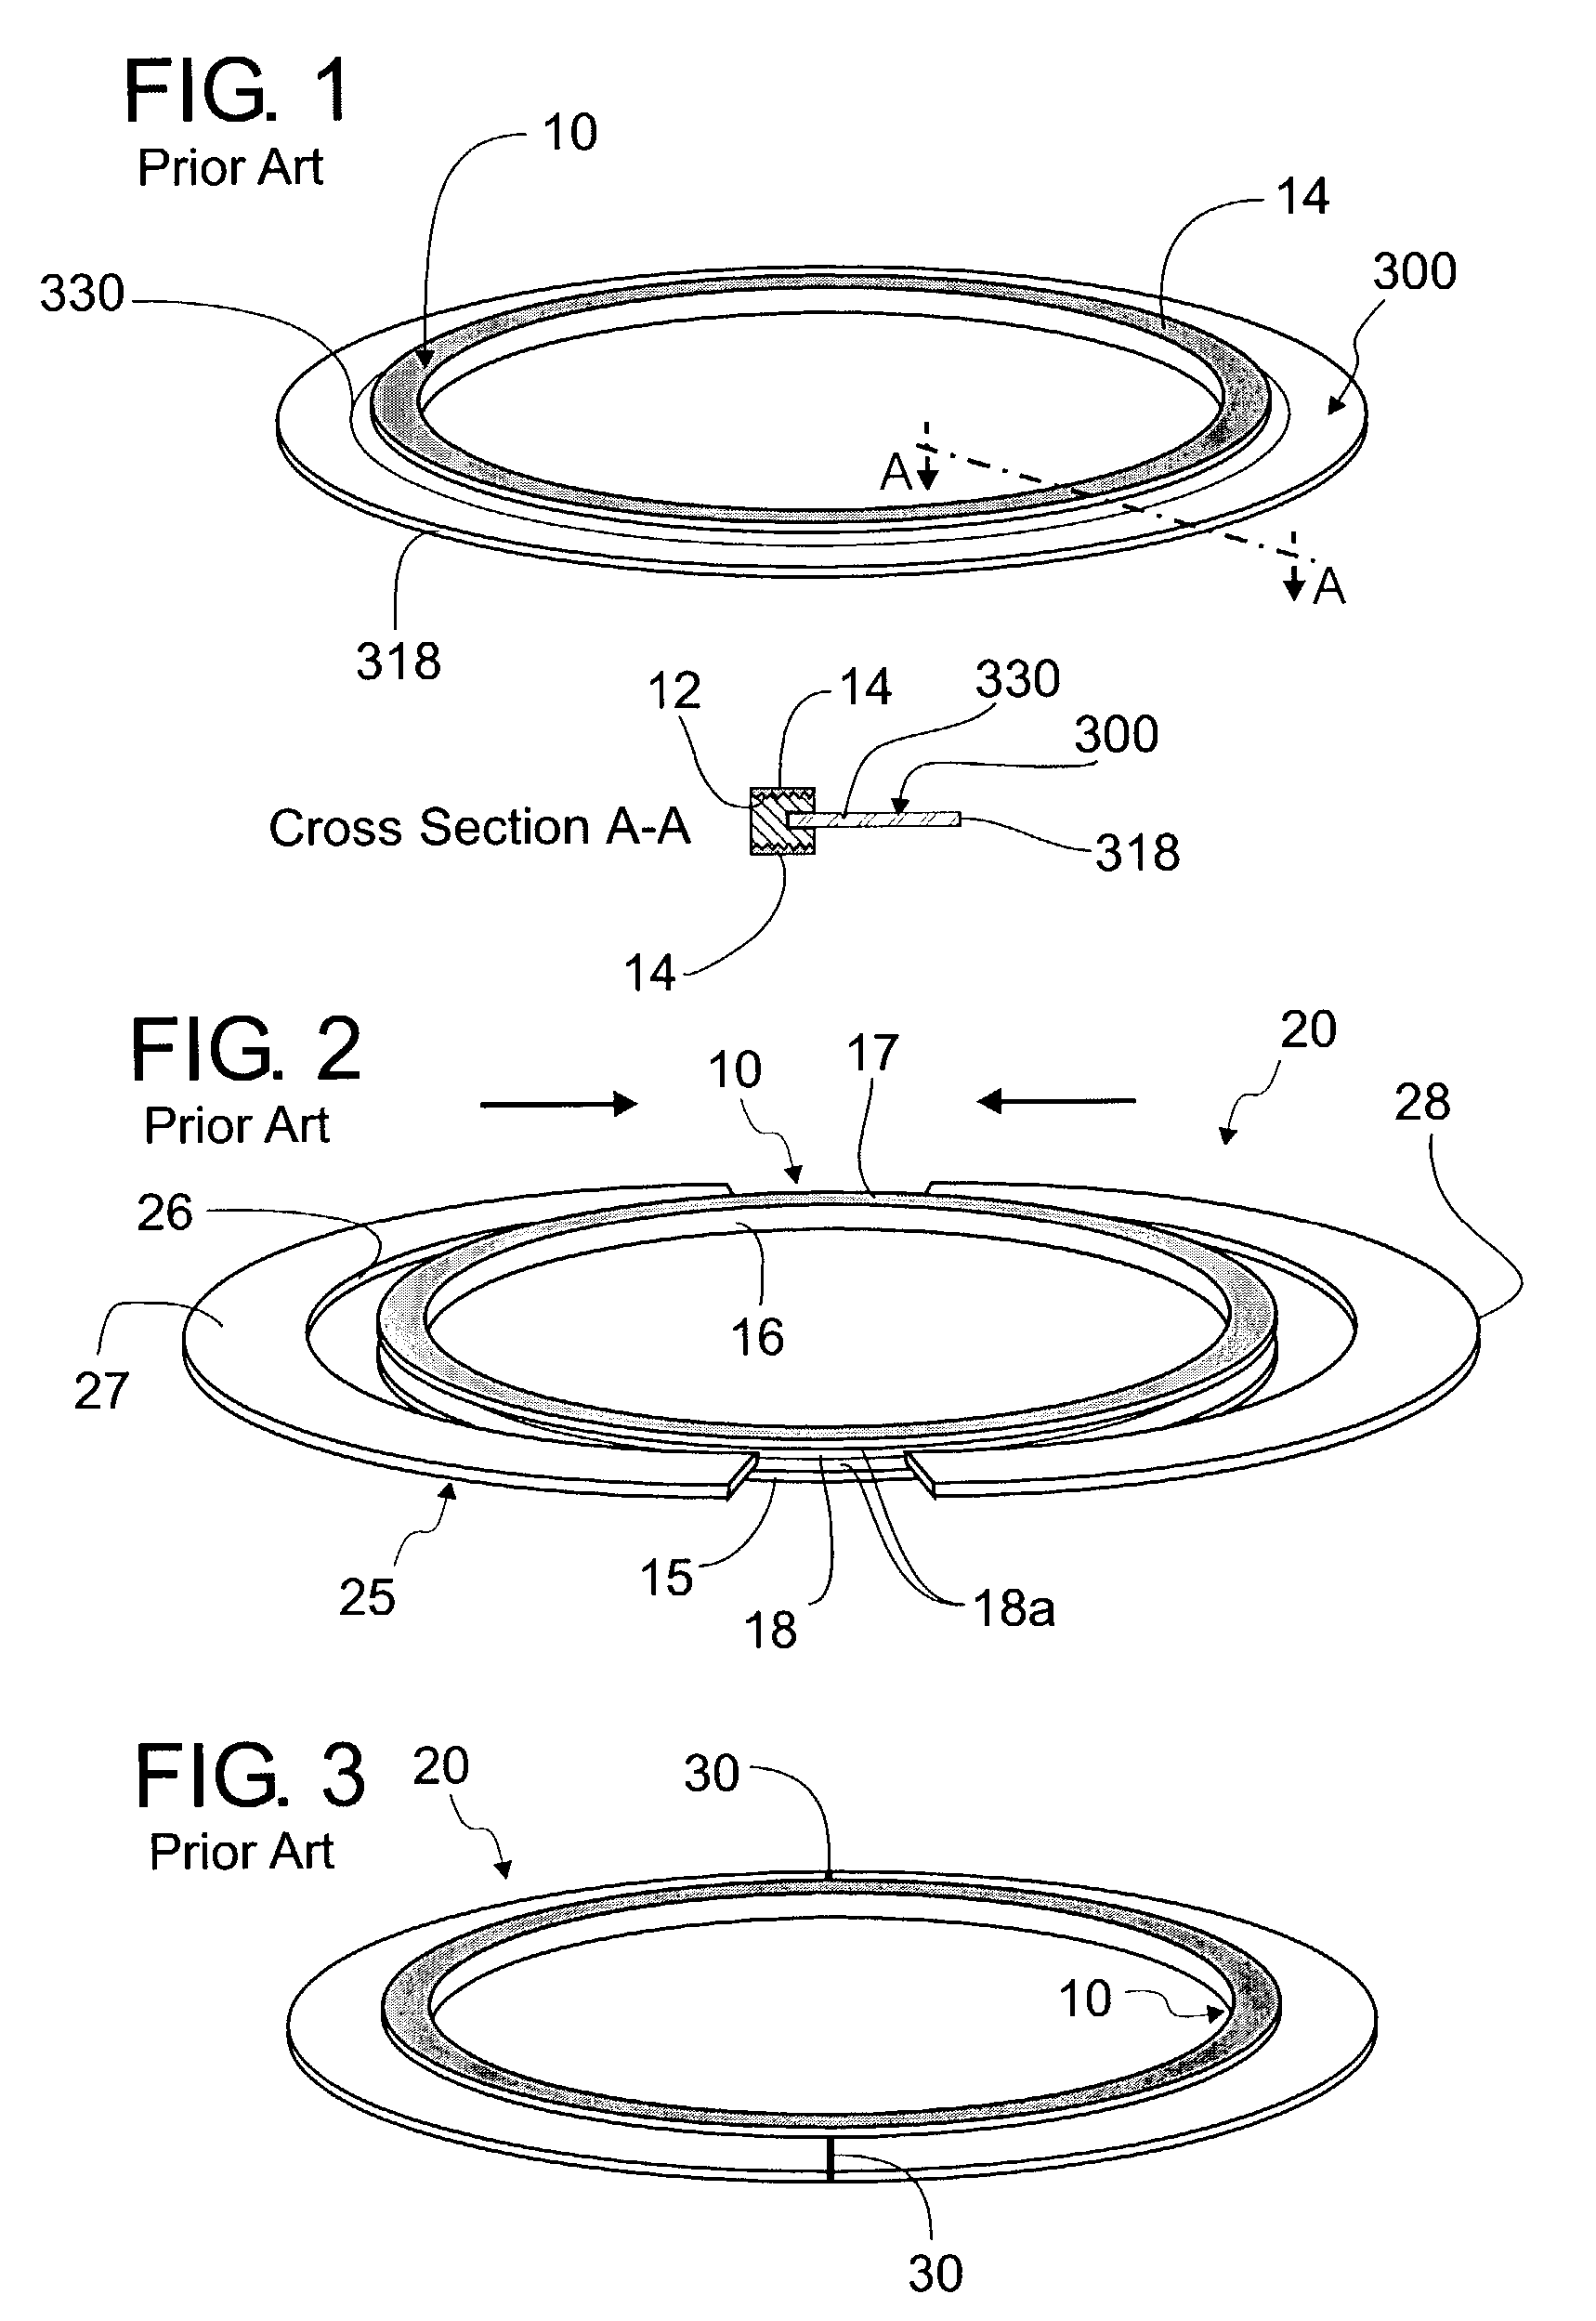 Gasket seal for flanges of piping and equipment, a method for manufacturing gasket seals, and a sealing ring for a gasket seal